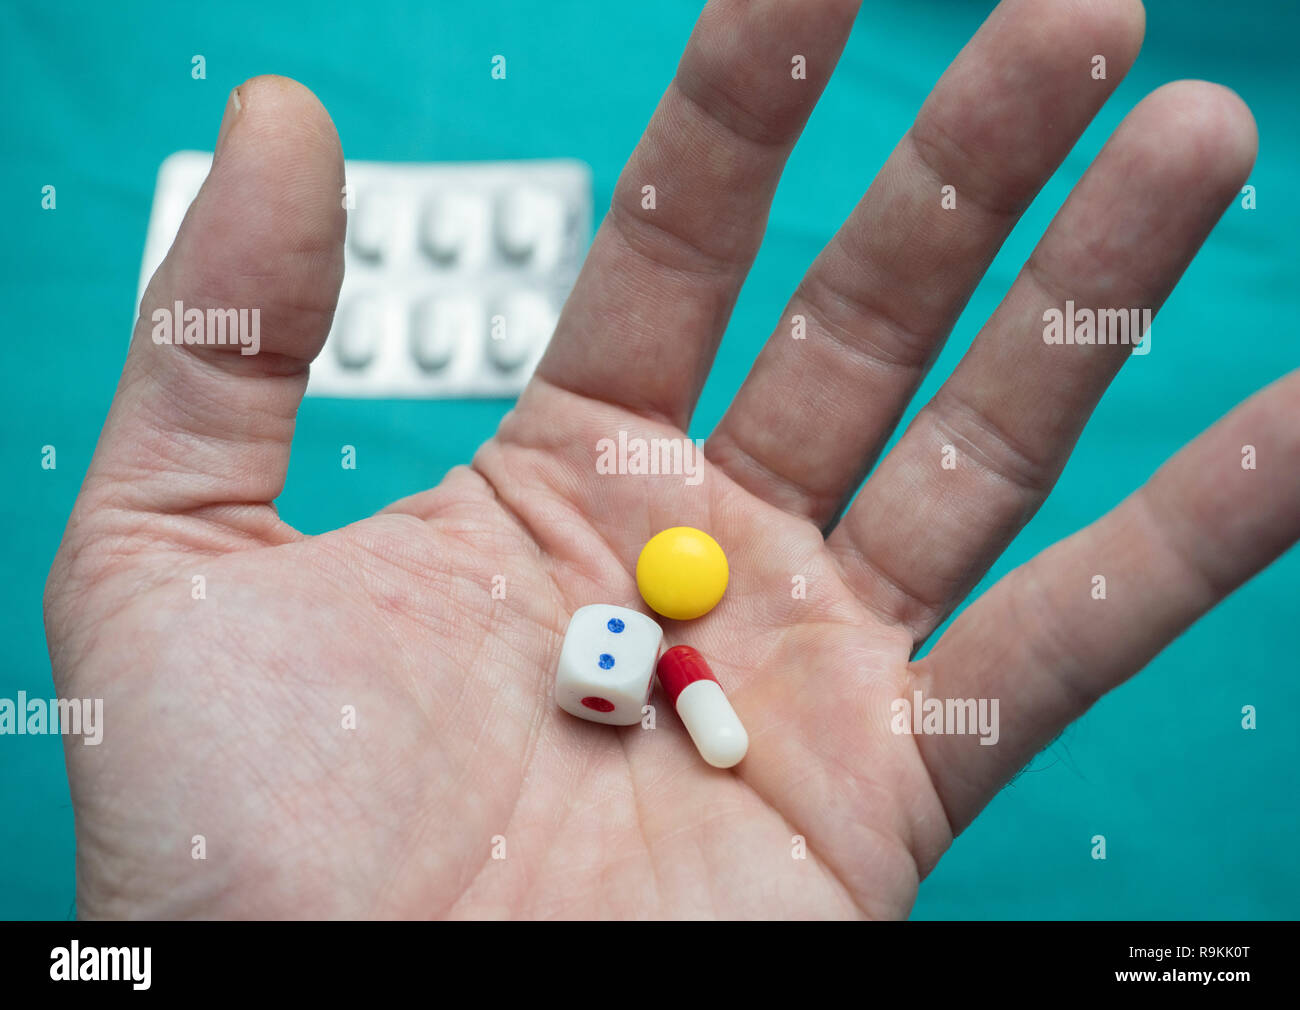 Left hand supports a few pills and a dice, conceptual image Stock Photo